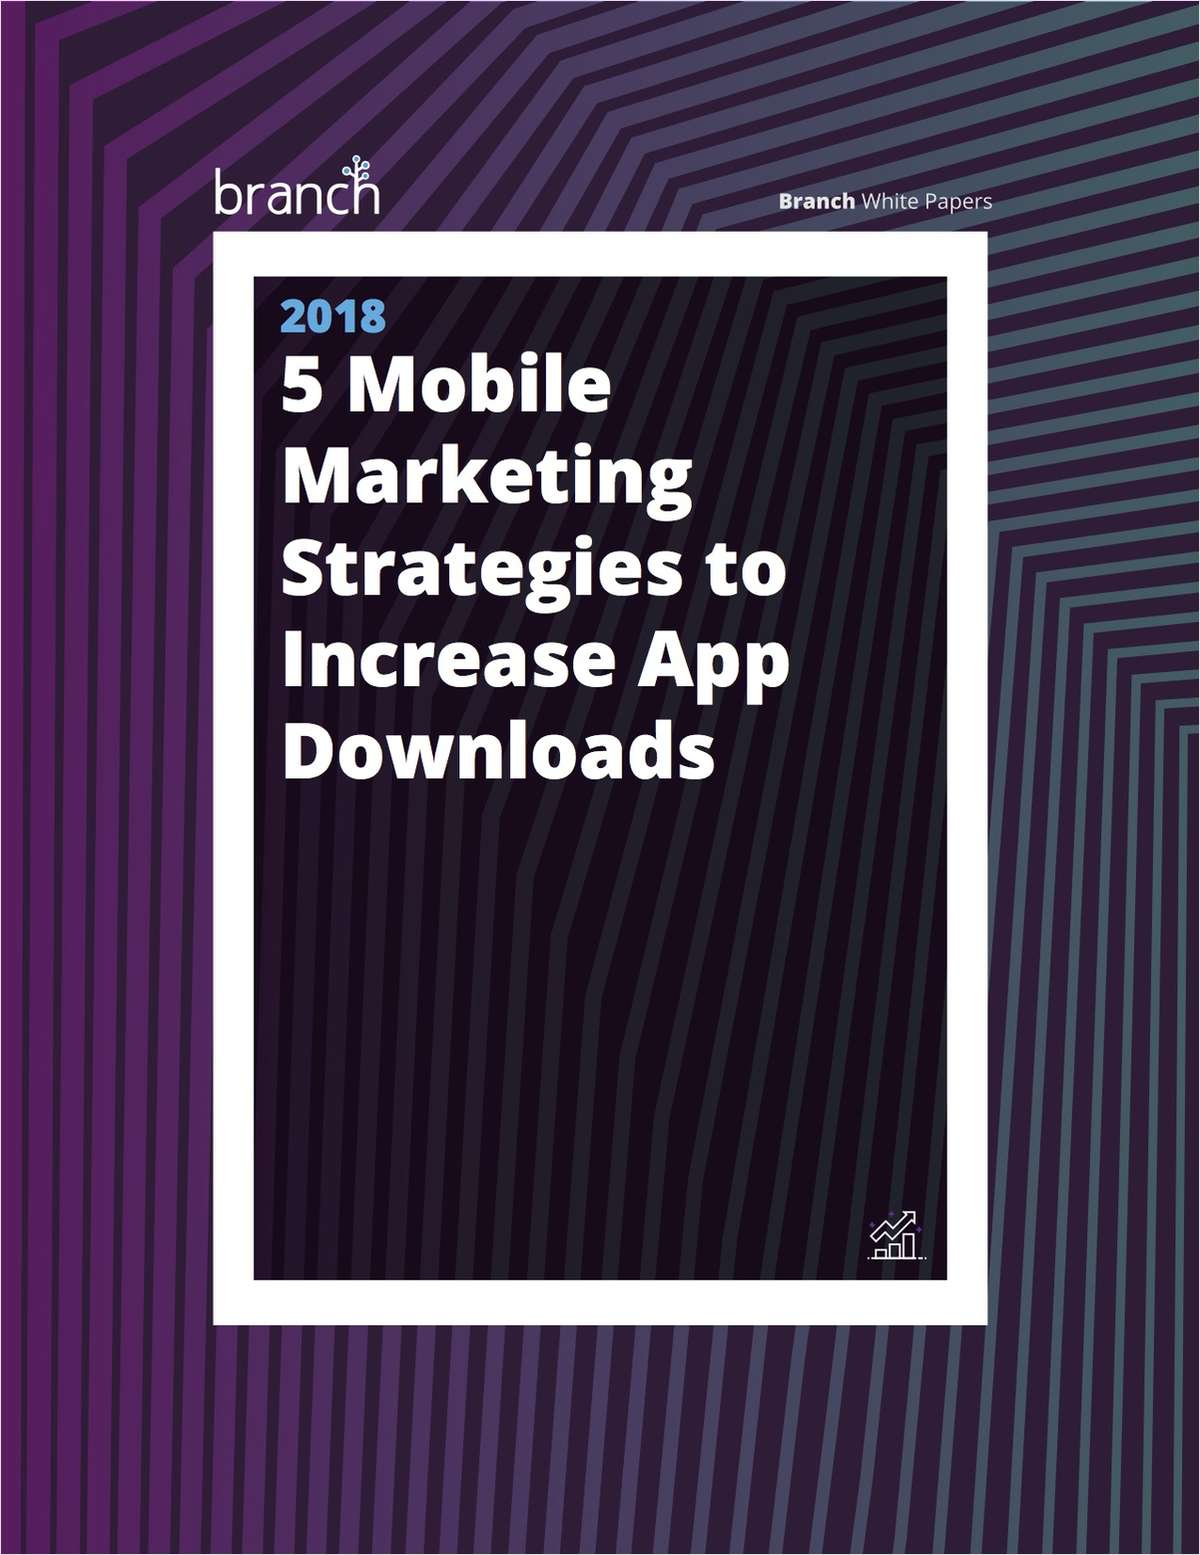 5 Mobile Marketing Strategies to Increase App Downloads